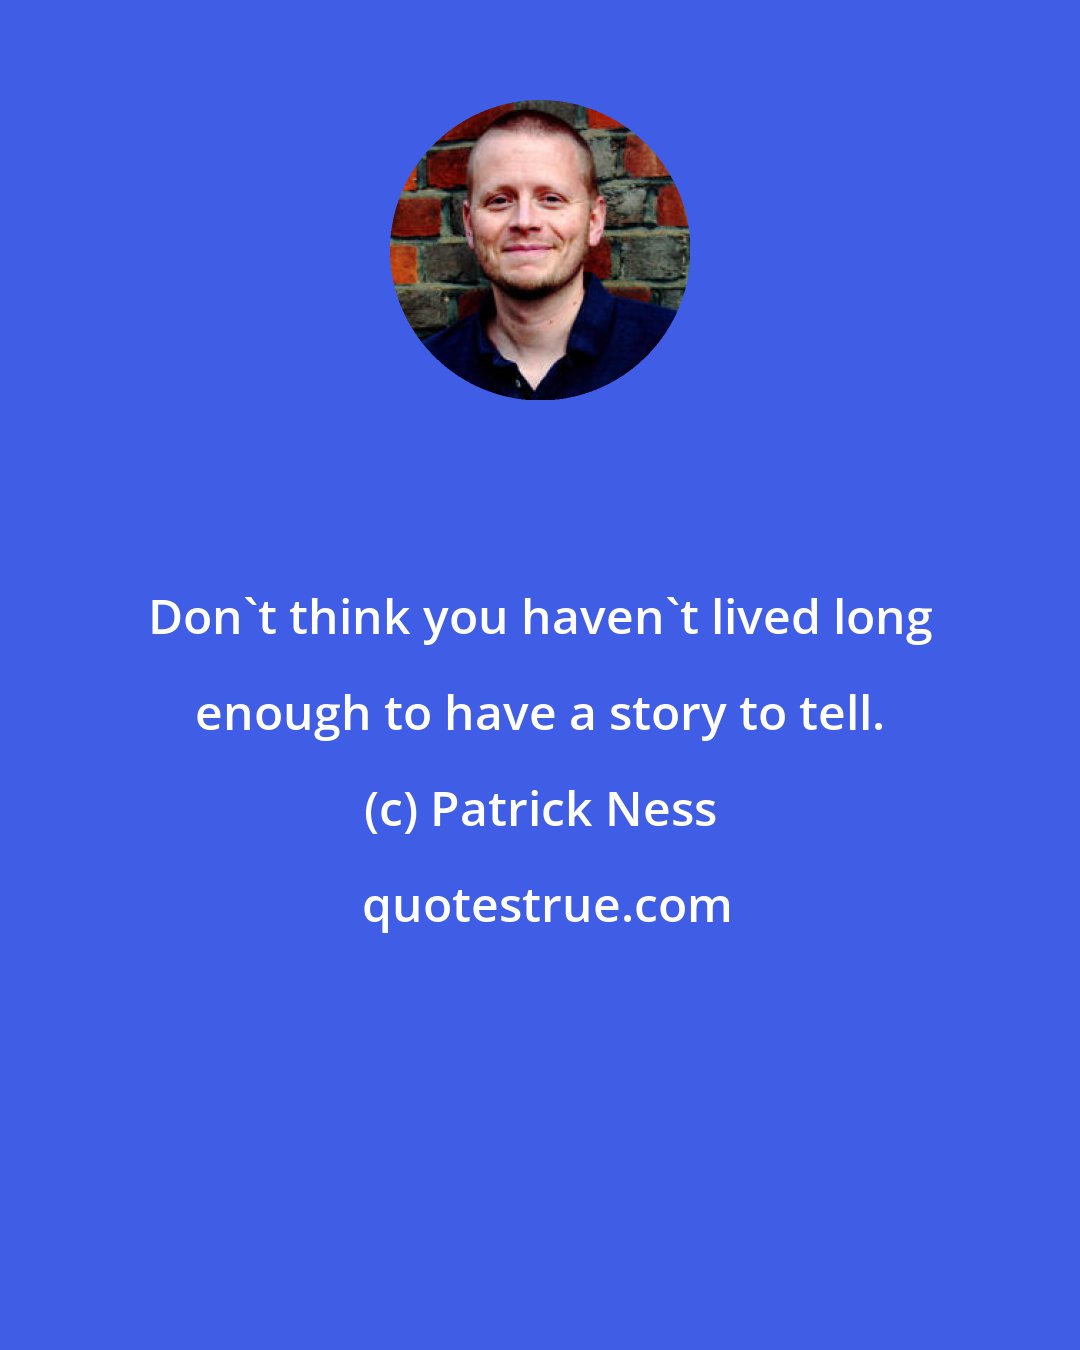 Patrick Ness: Don't think you haven't lived long enough to have a story to tell.